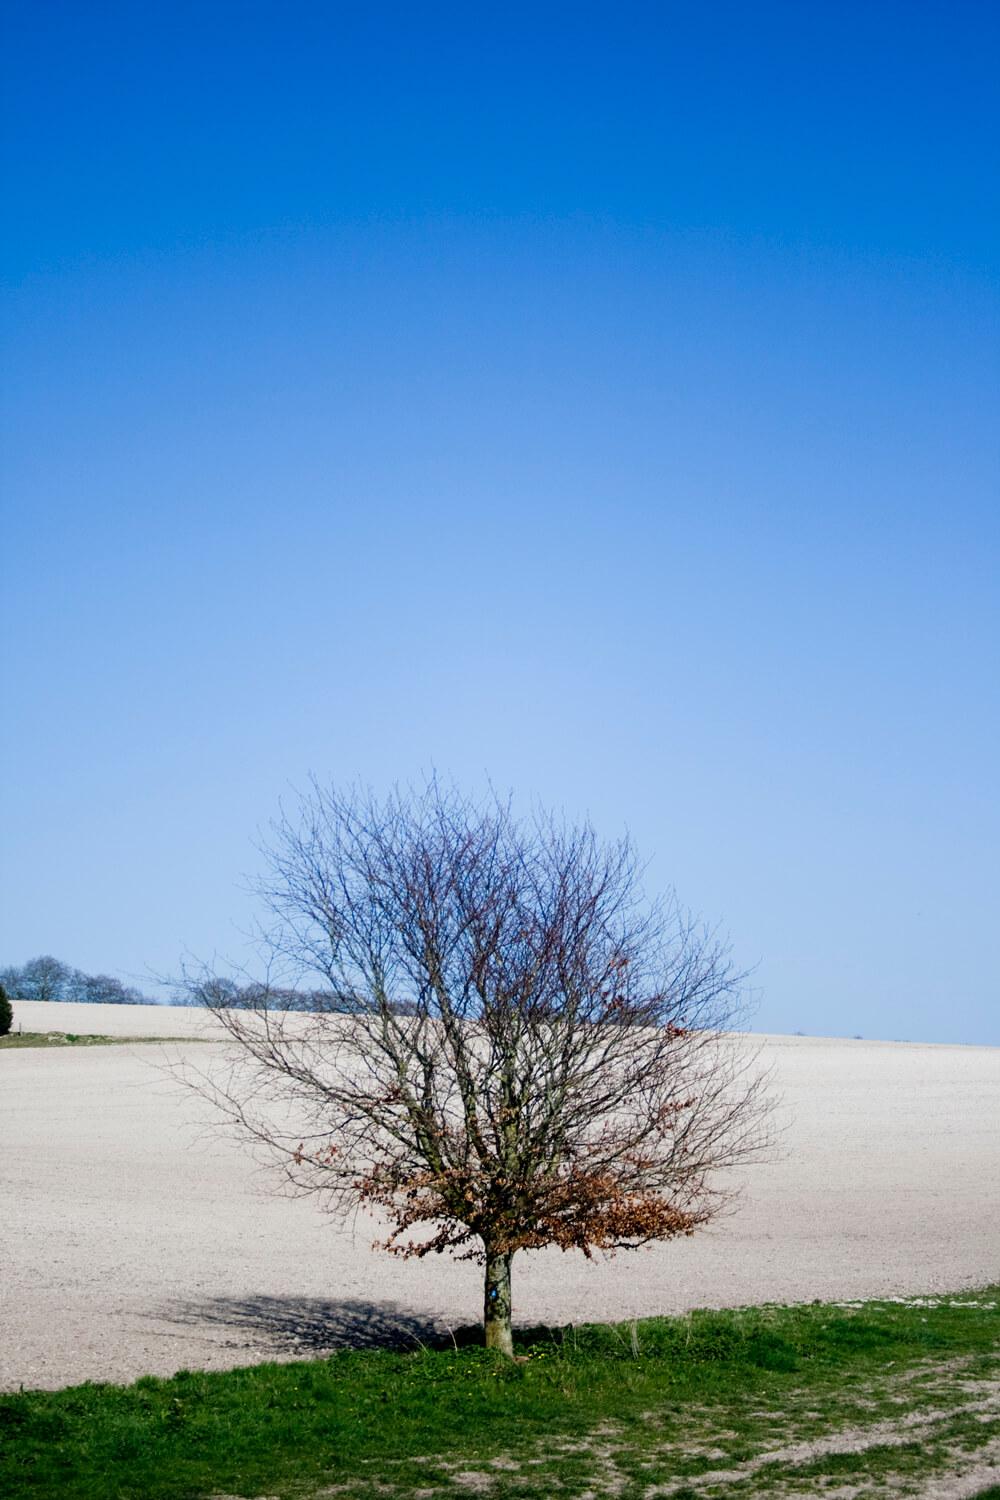 A small twiggy tree that appears alone in the center of the photo, behind it is an empty field and a stark blue sky